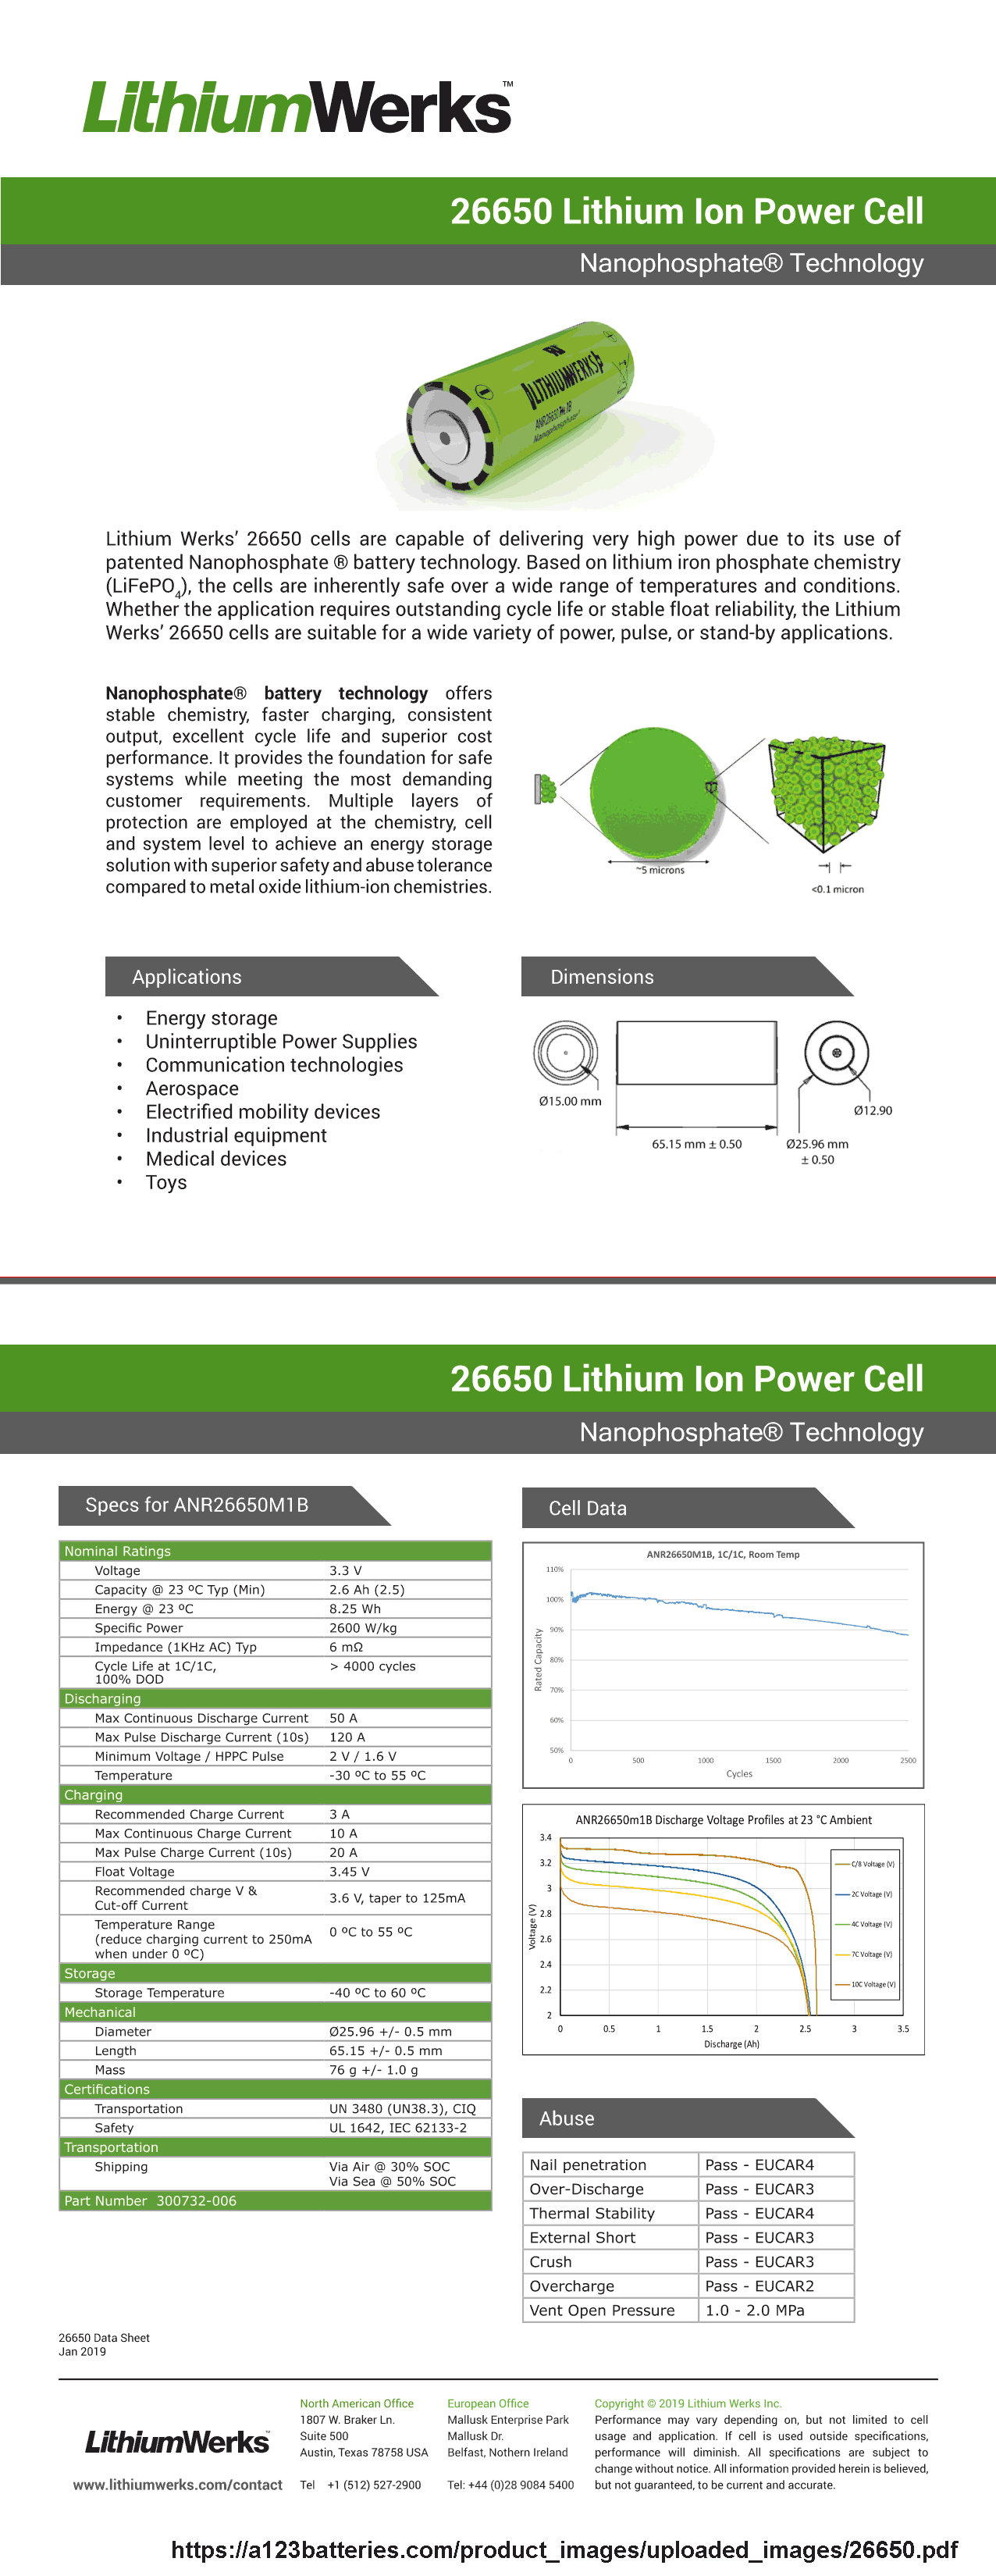 Lithium ion power cell based on lithium iron phosphate chemistry LiFePO4.